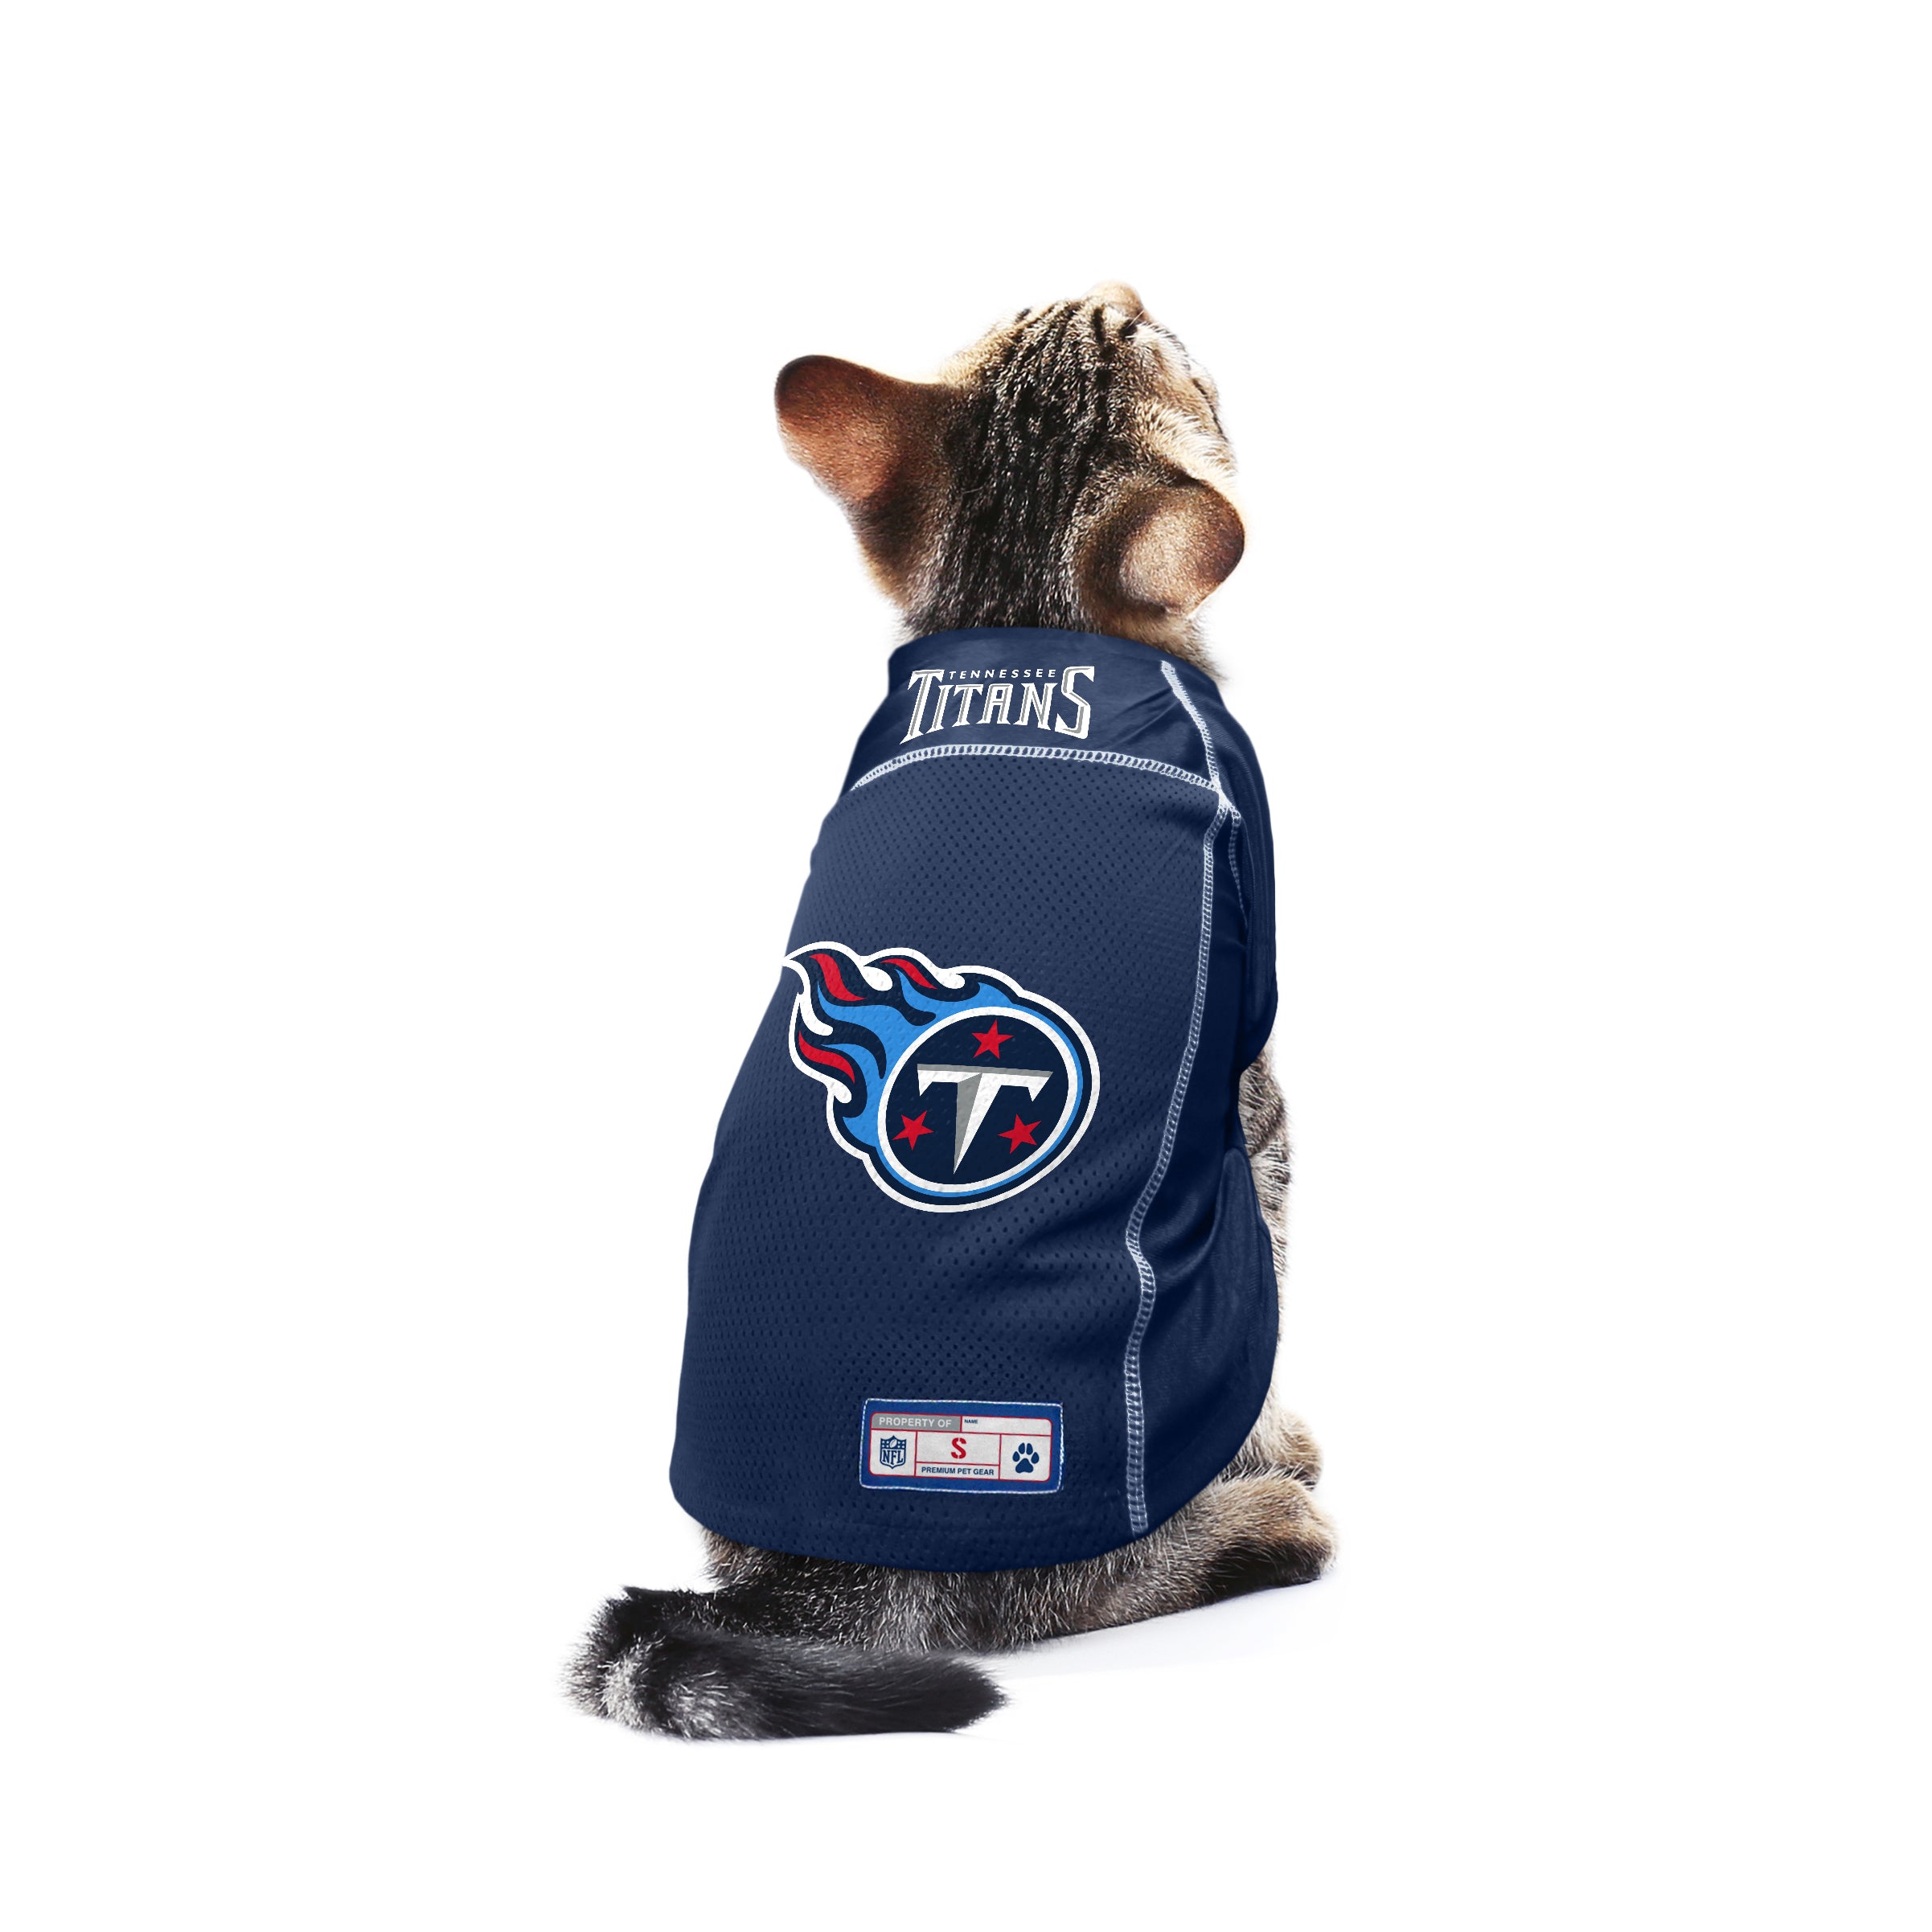  NFL Tennessee Titans Dog Jersey, Size: X-Large. Best Football  Jersey Costume for Dogs & Cats. Licensed Jersey Shirt. : Sports & Outdoors